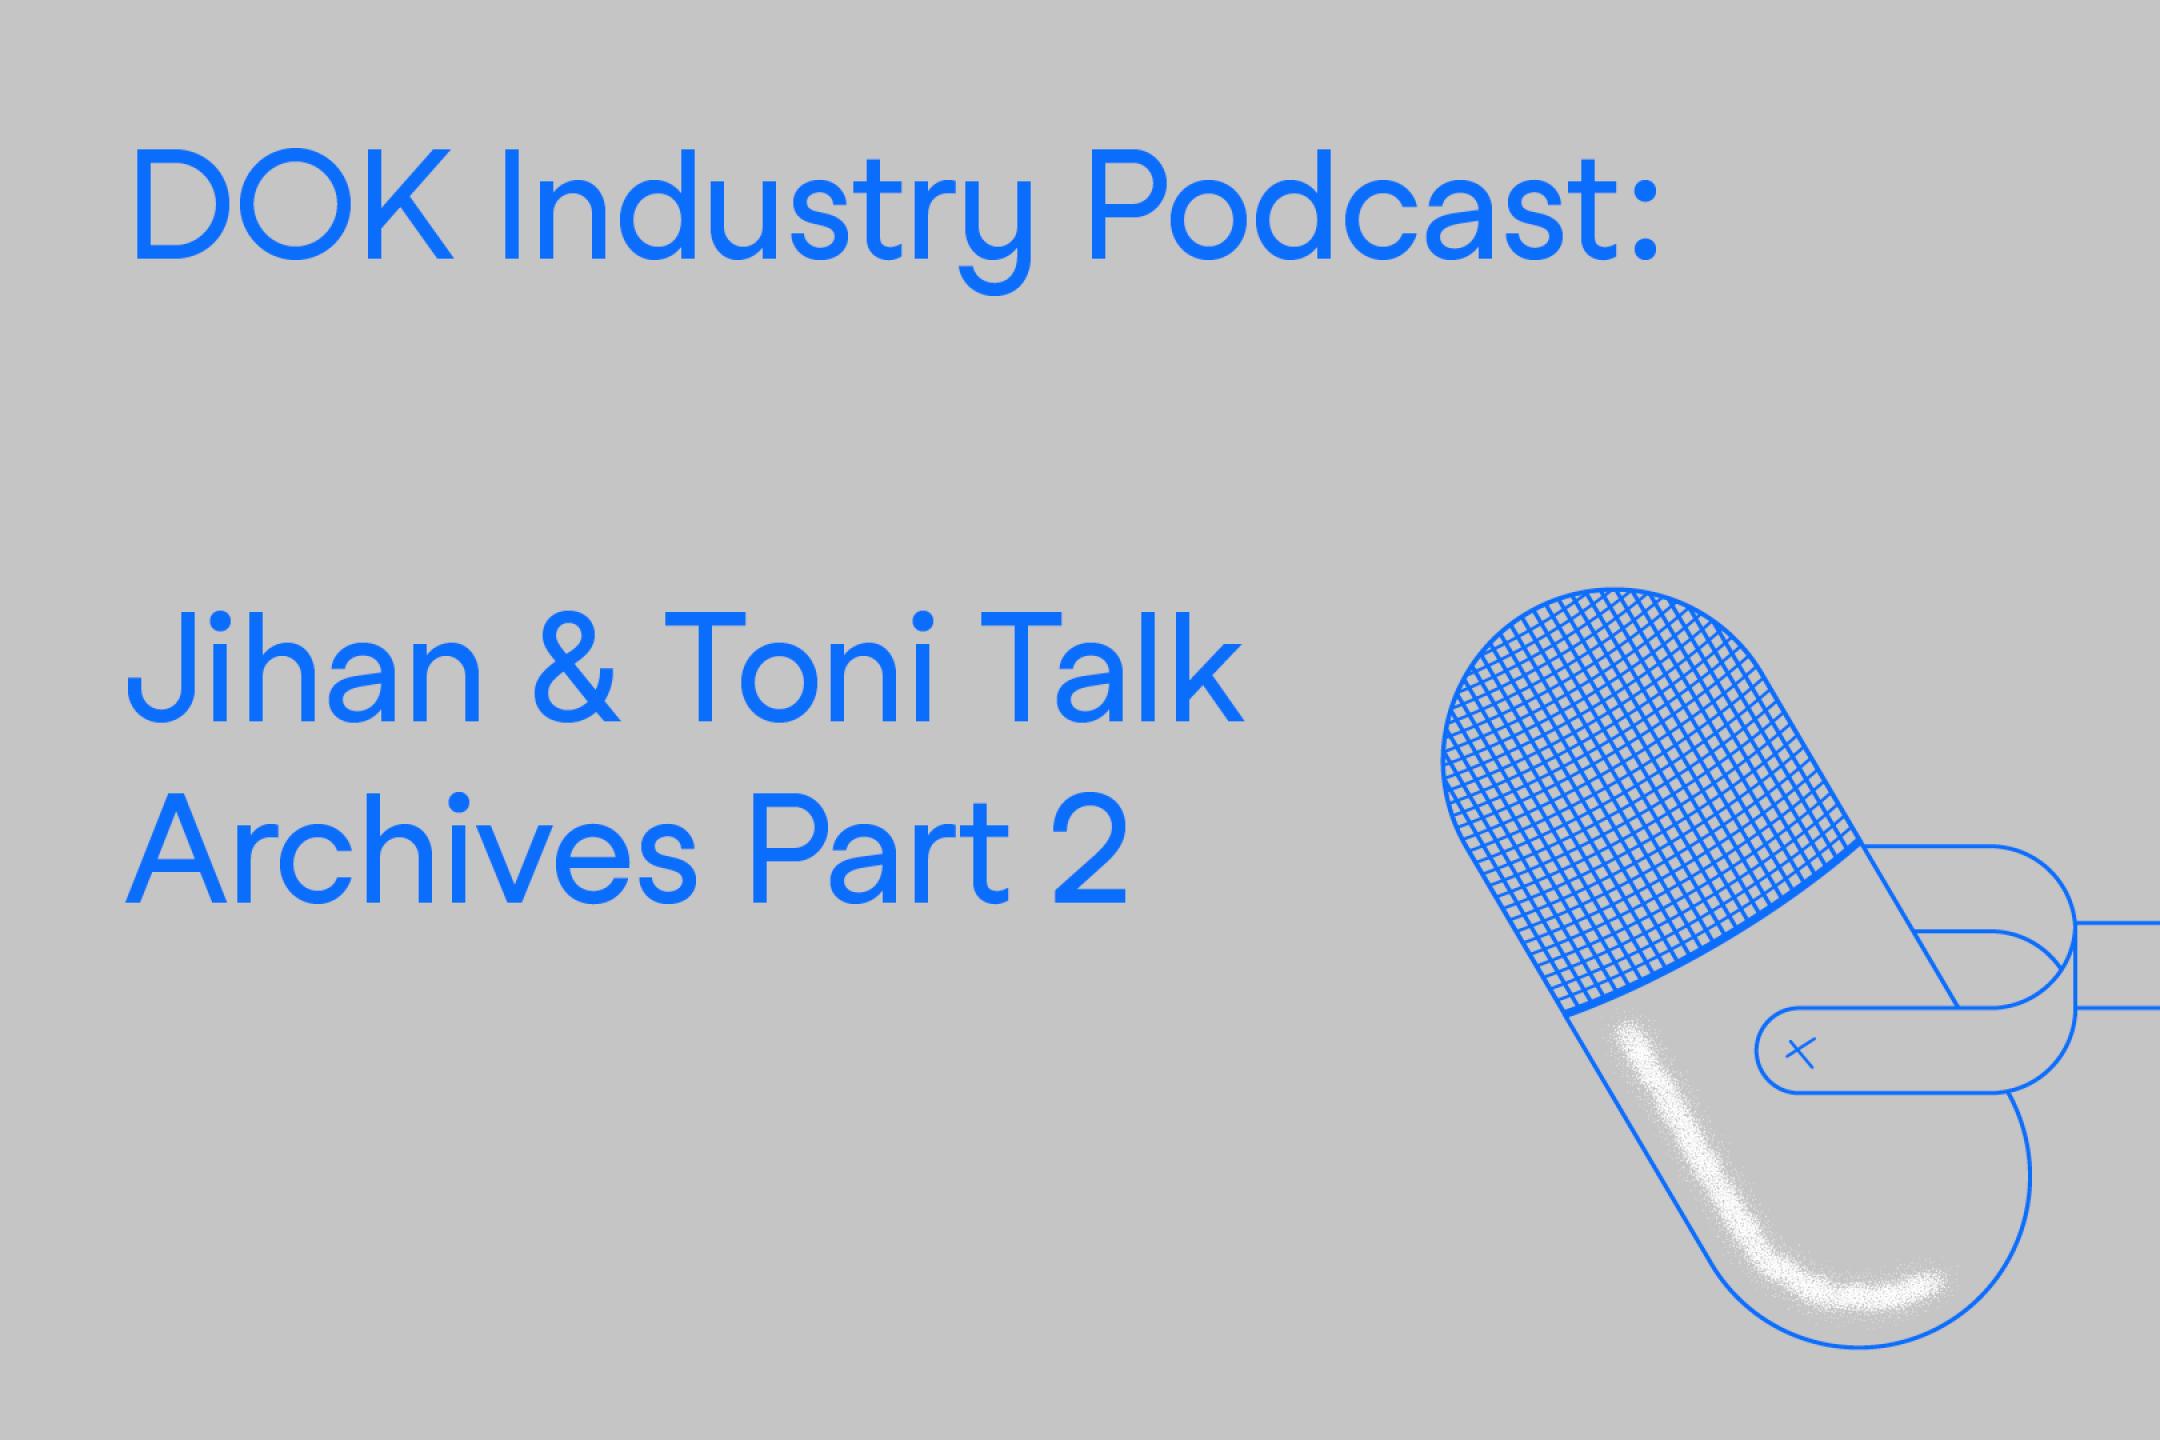 A text graphic: At the right a radio microphone in blue, at the left the text: "DOK Industry Podcast: Johann & Toni Talk Archives"